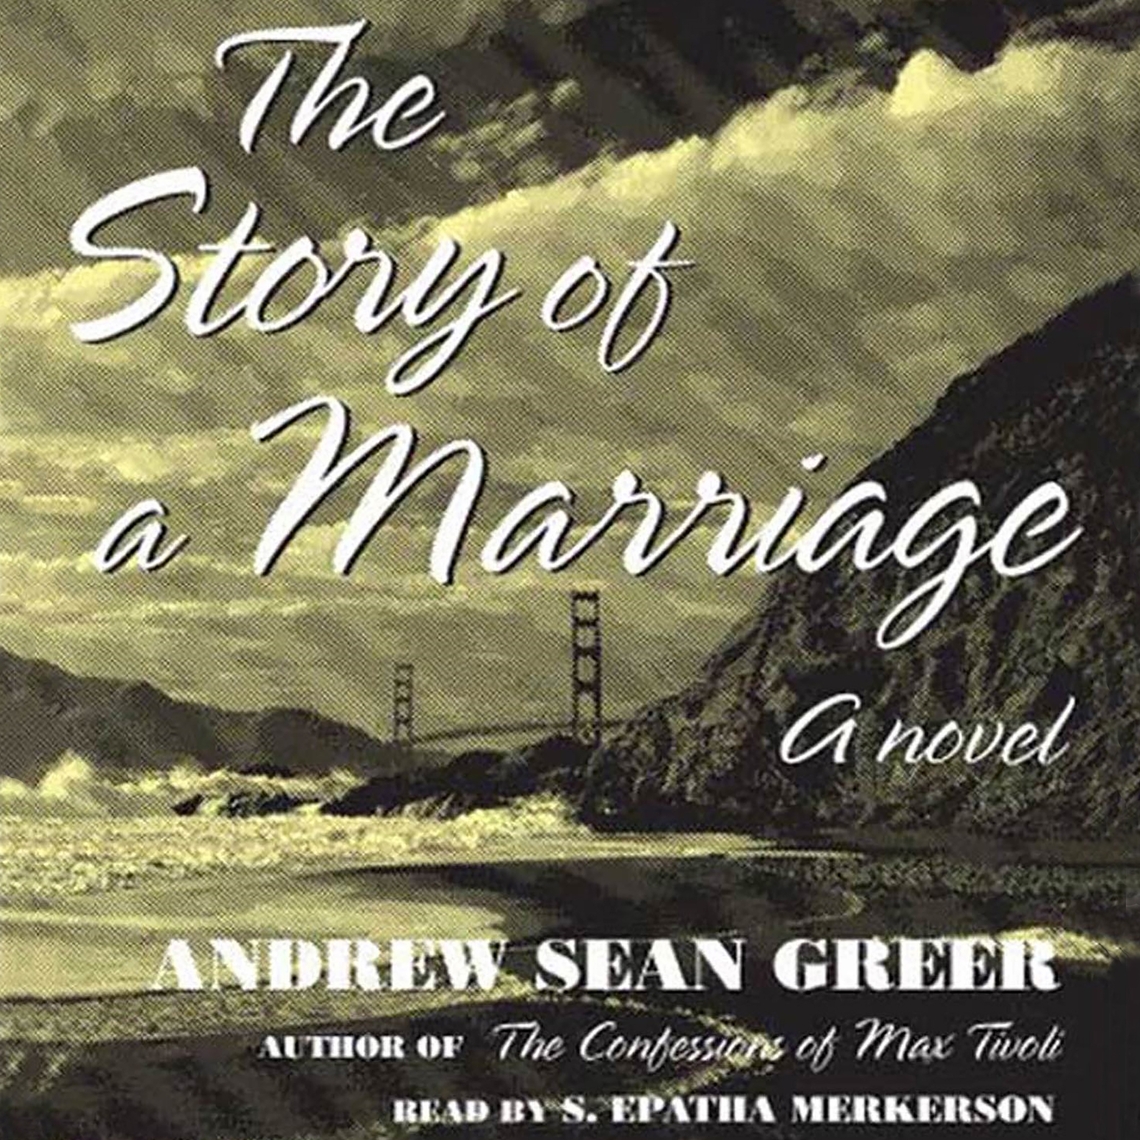 The Story of a Marriage by Andrew Sean Greer - Audiobook